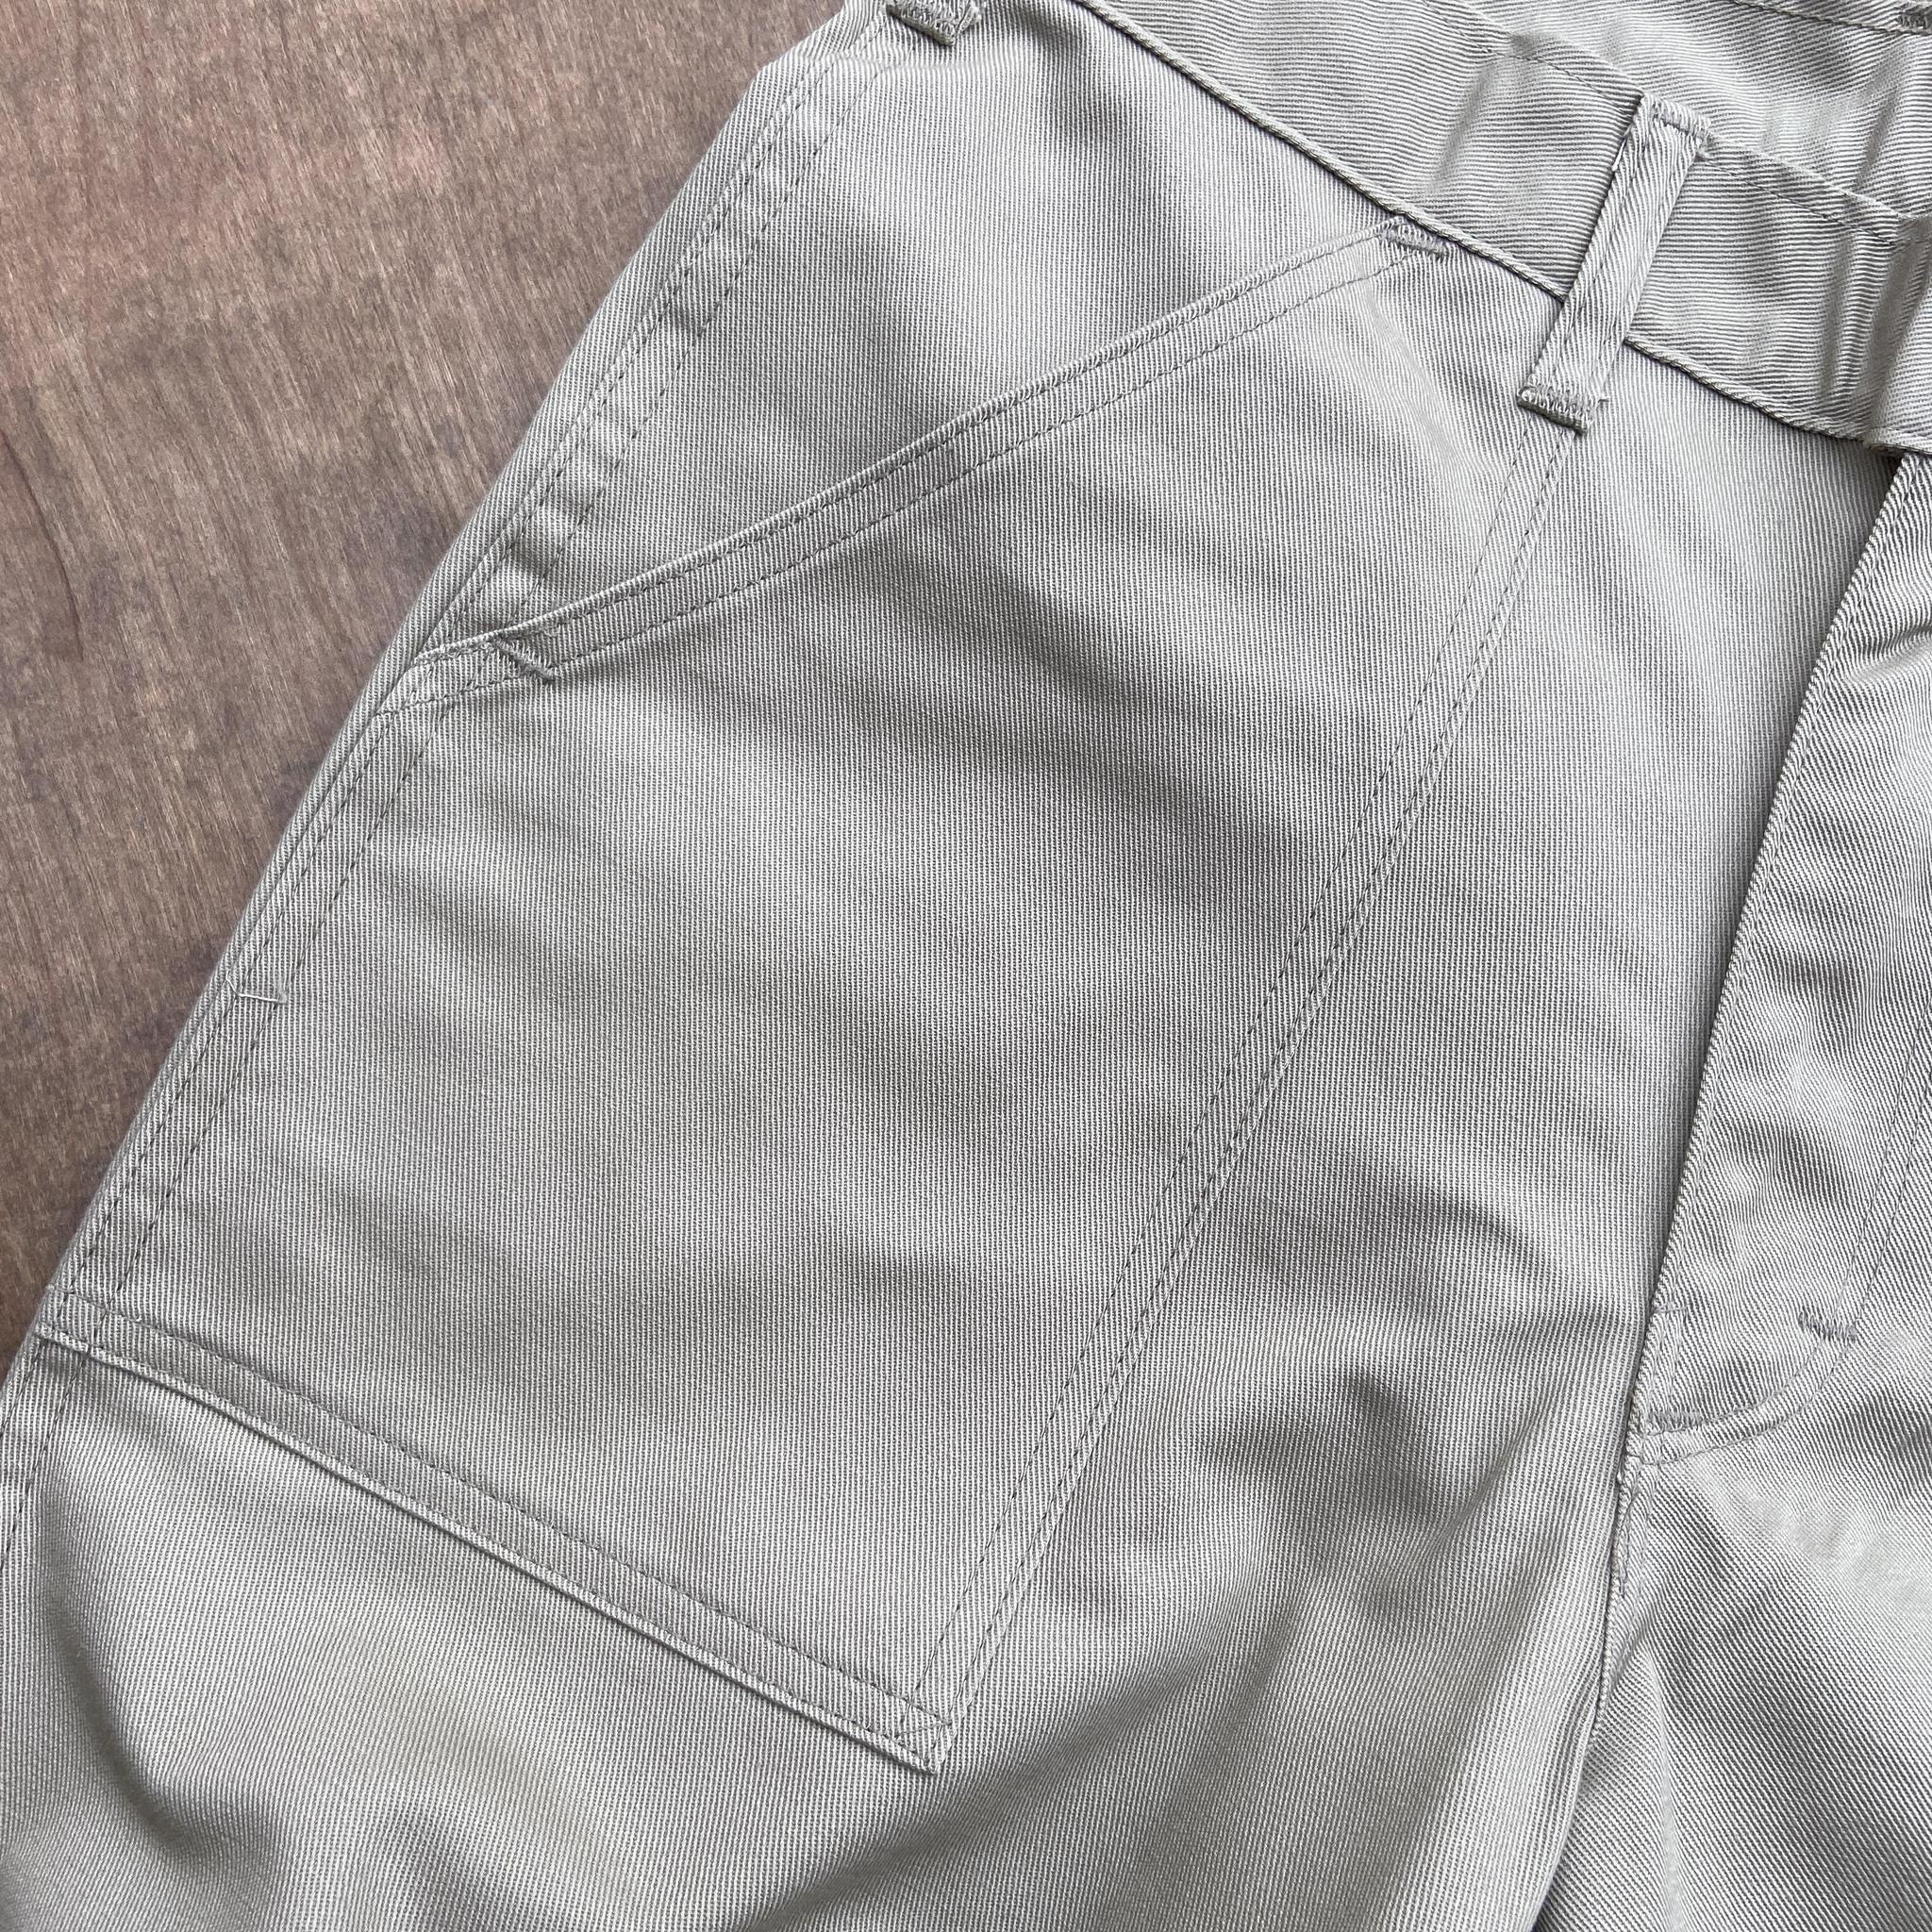 Stan Ray Tapered Fatigue Khaki Twill Pants - Crimson Serpents Outpost